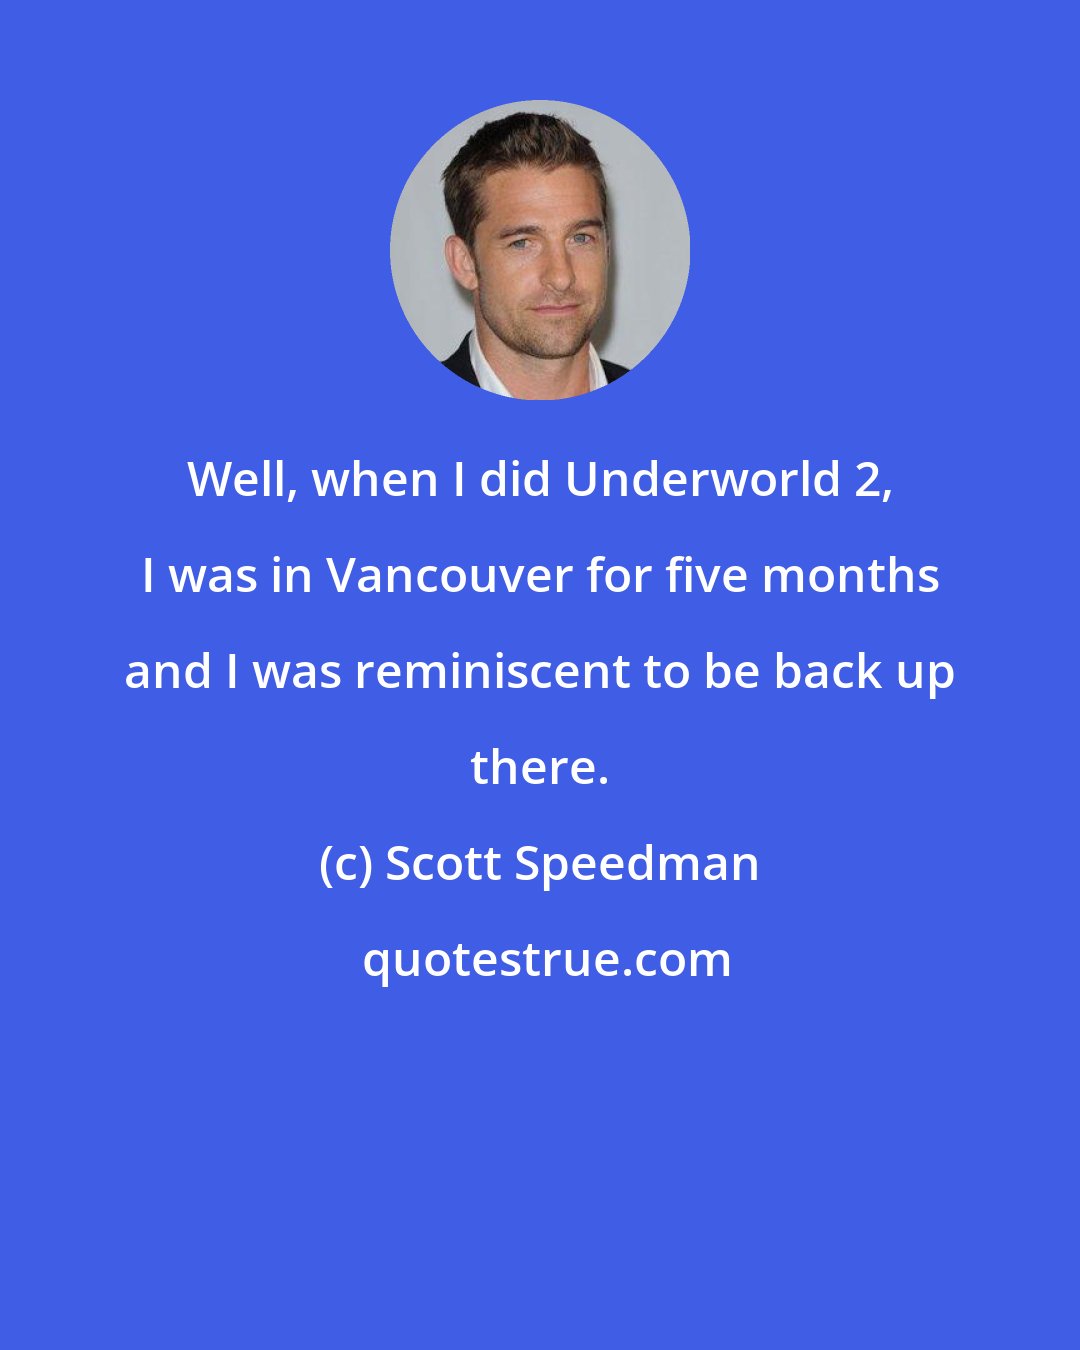 Scott Speedman: Well, when I did Underworld 2, I was in Vancouver for five months and I was reminiscent to be back up there.